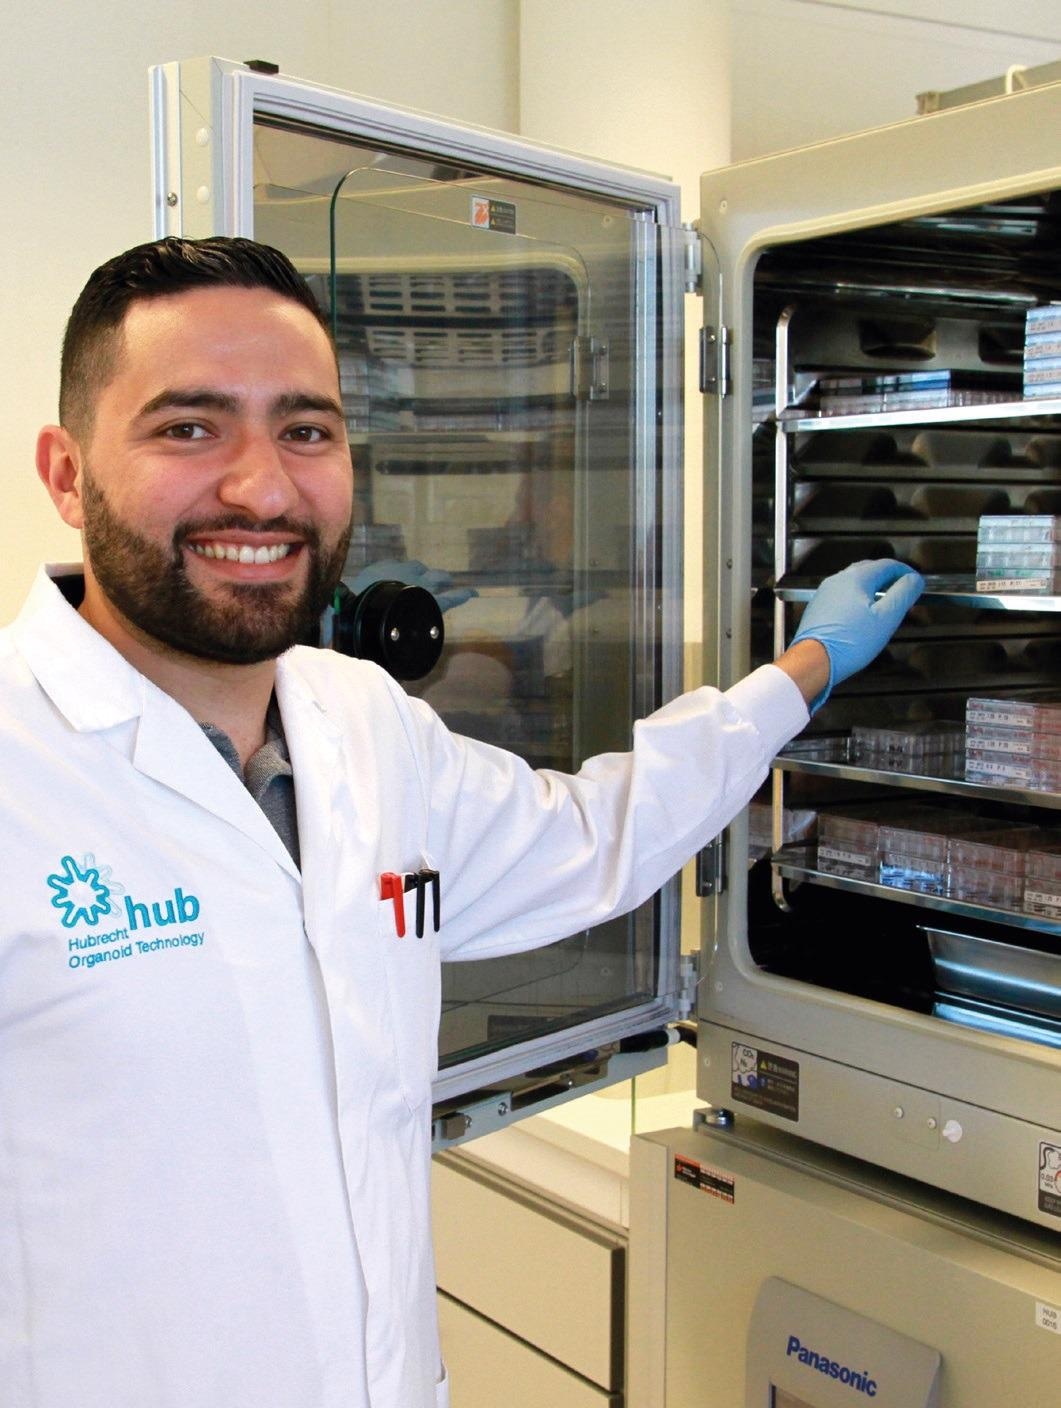 HUB (Hubrecht Organoid Technology) uses CO2 incubators by PHC Europe for cultivating organoids. Pictured is lab assistant Ramazan Senlice next to one of the currently seventeen incubators.